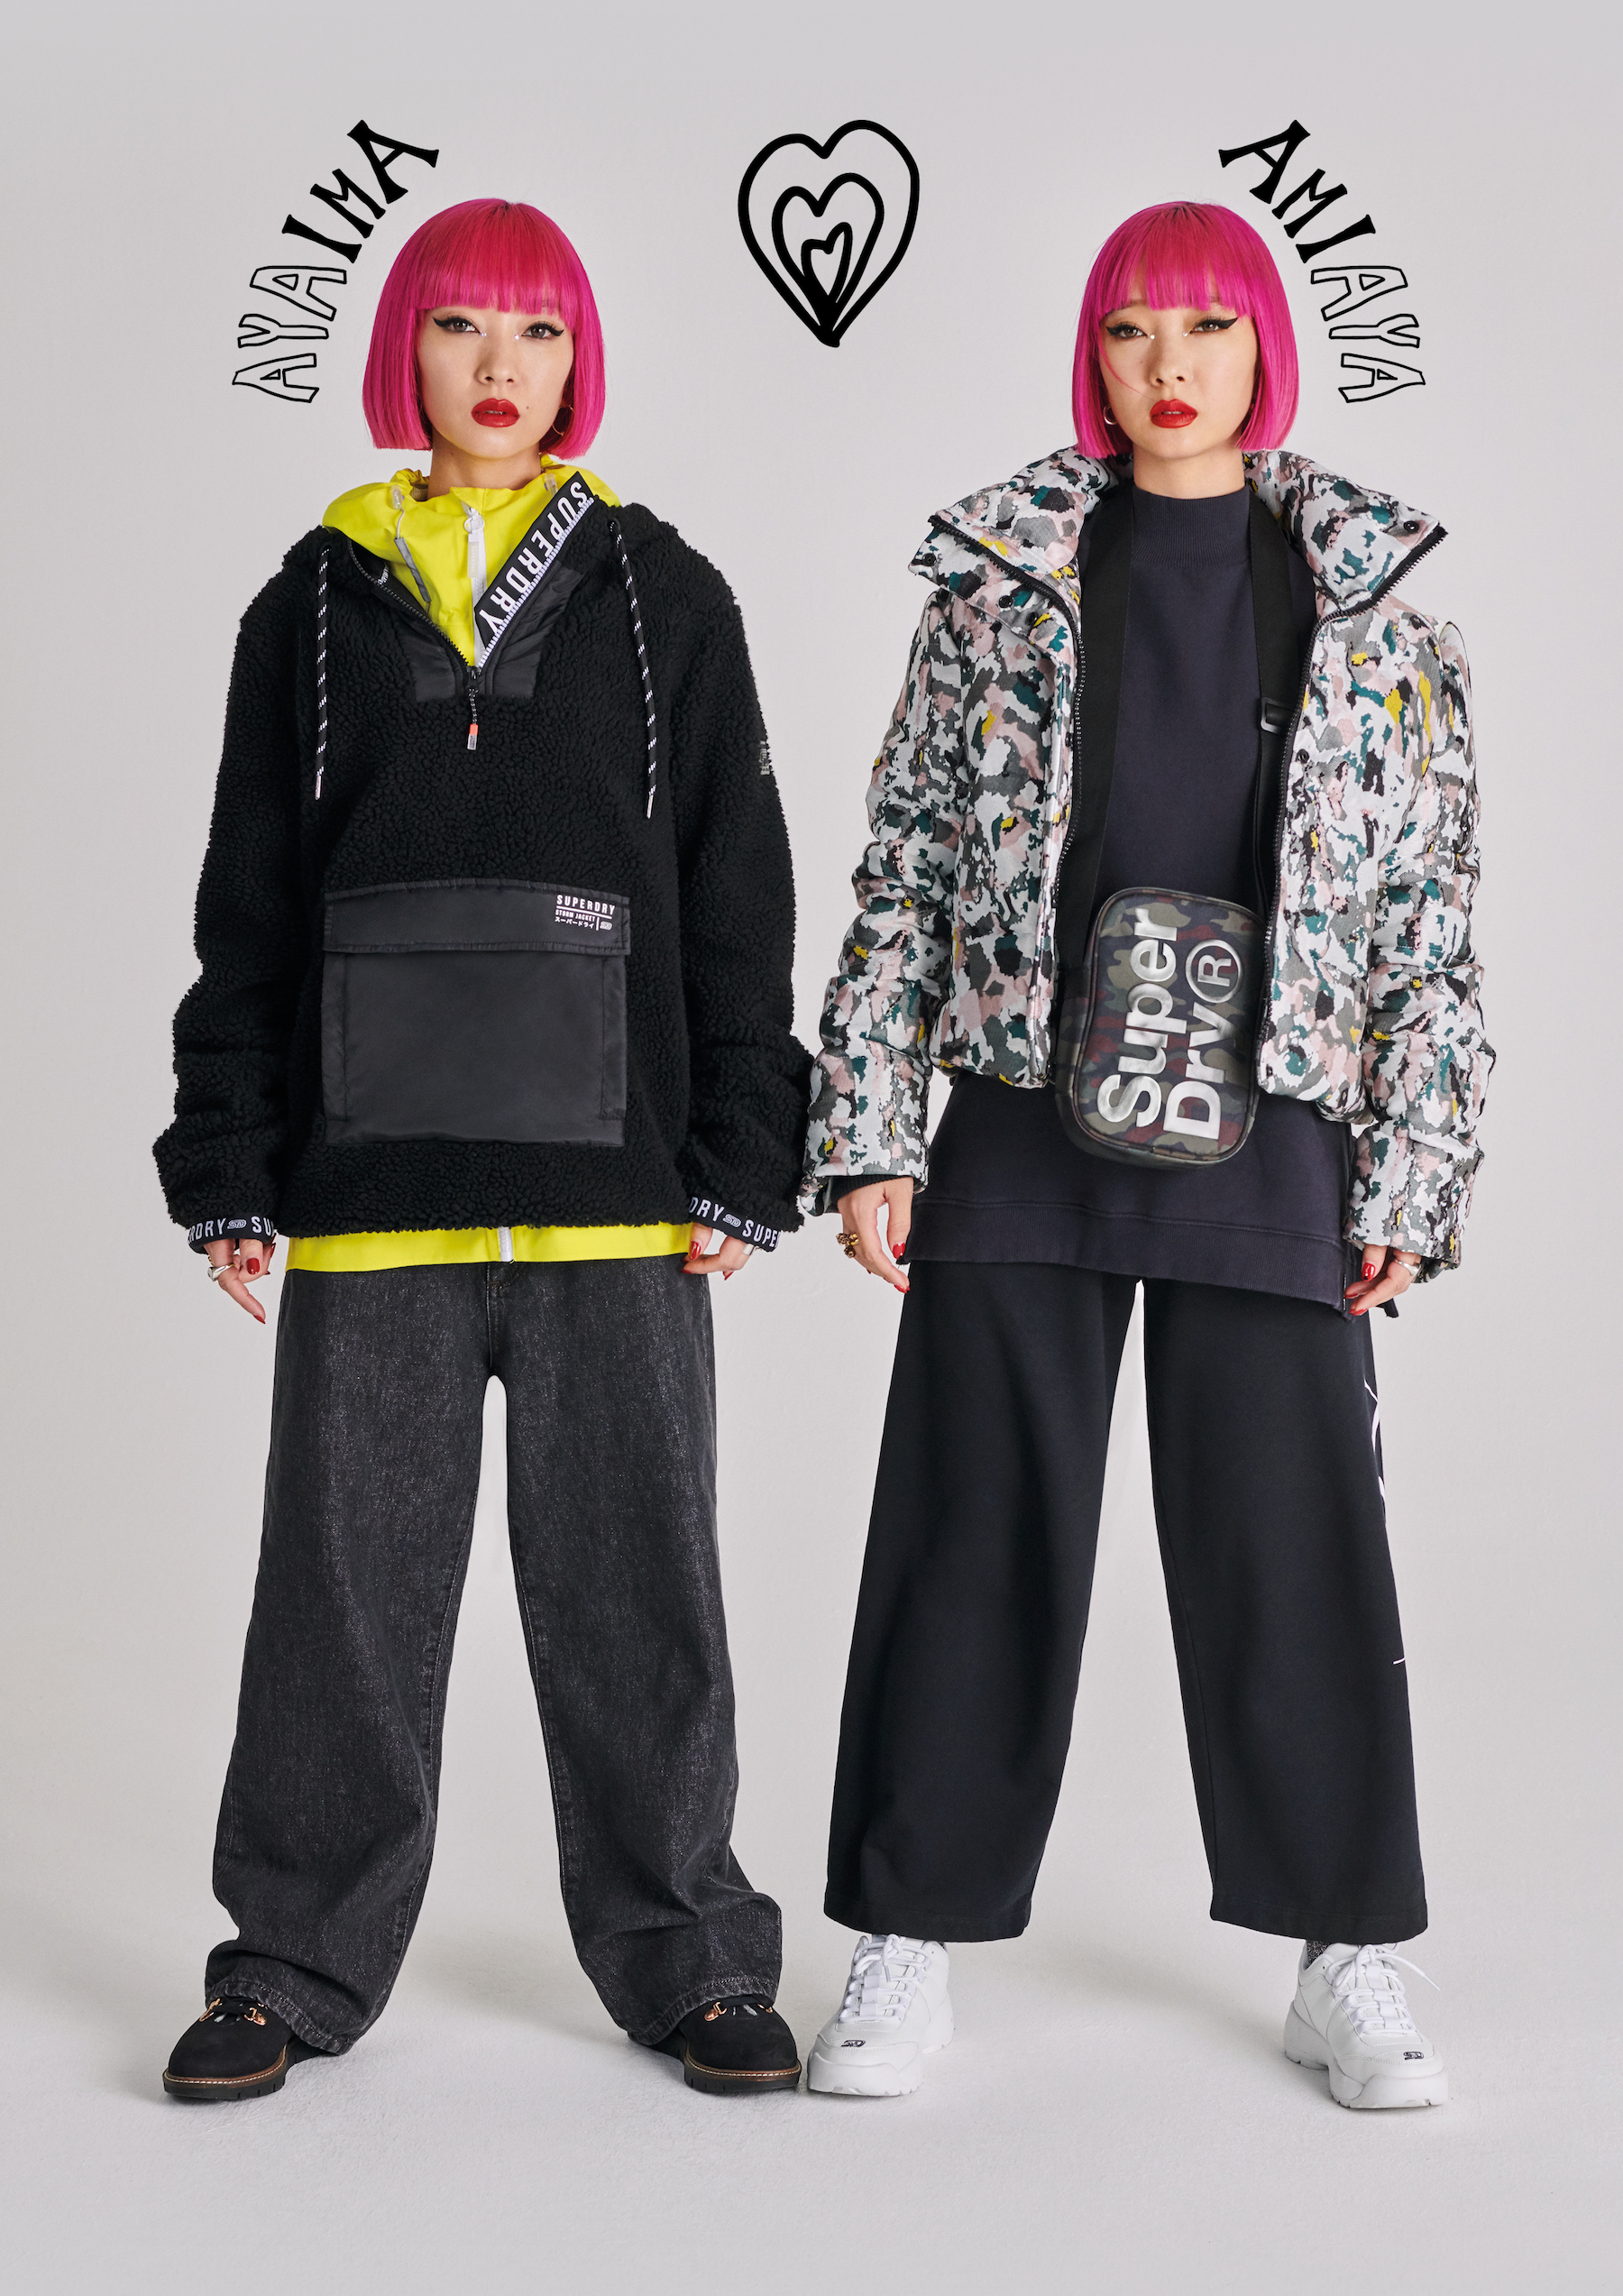 CR14204_PR_AW19_Annotated_Image_Gen_Simple_Twins.jpg